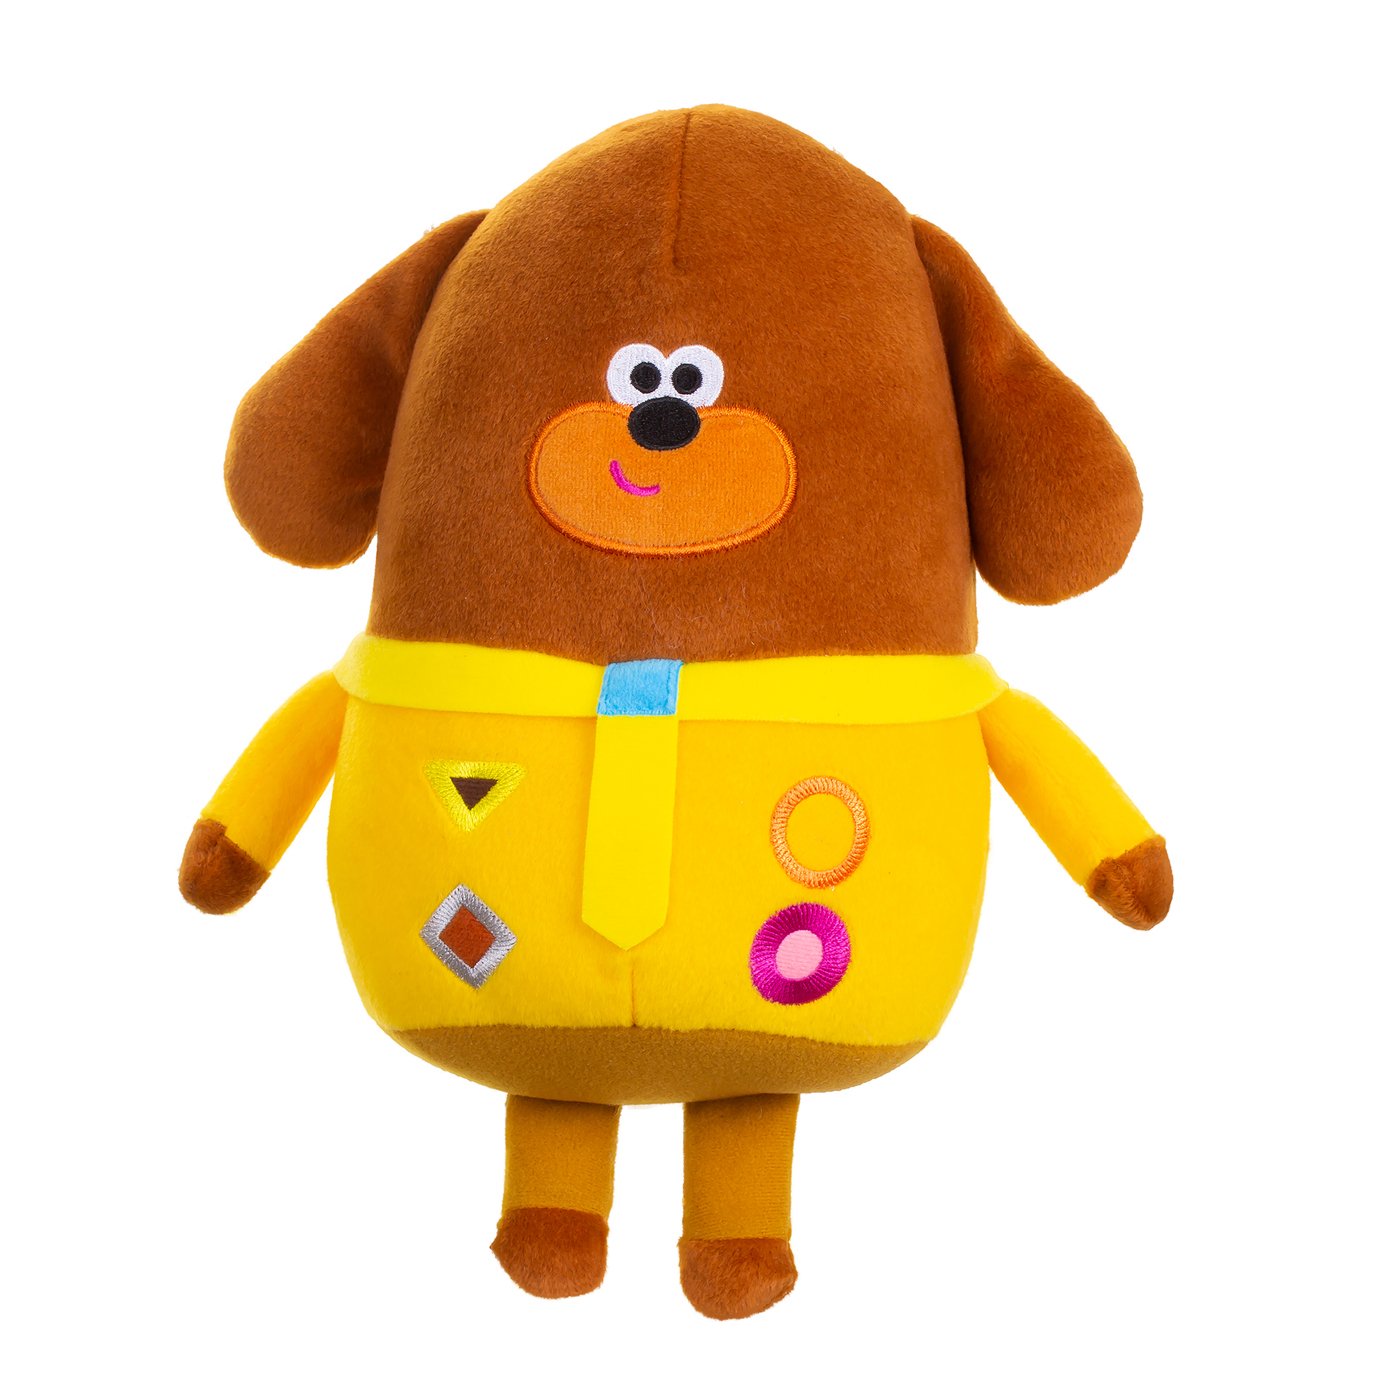 Plush with Duggee Badge Details about   Hey Duggee Talking Duggee Soft Toy 